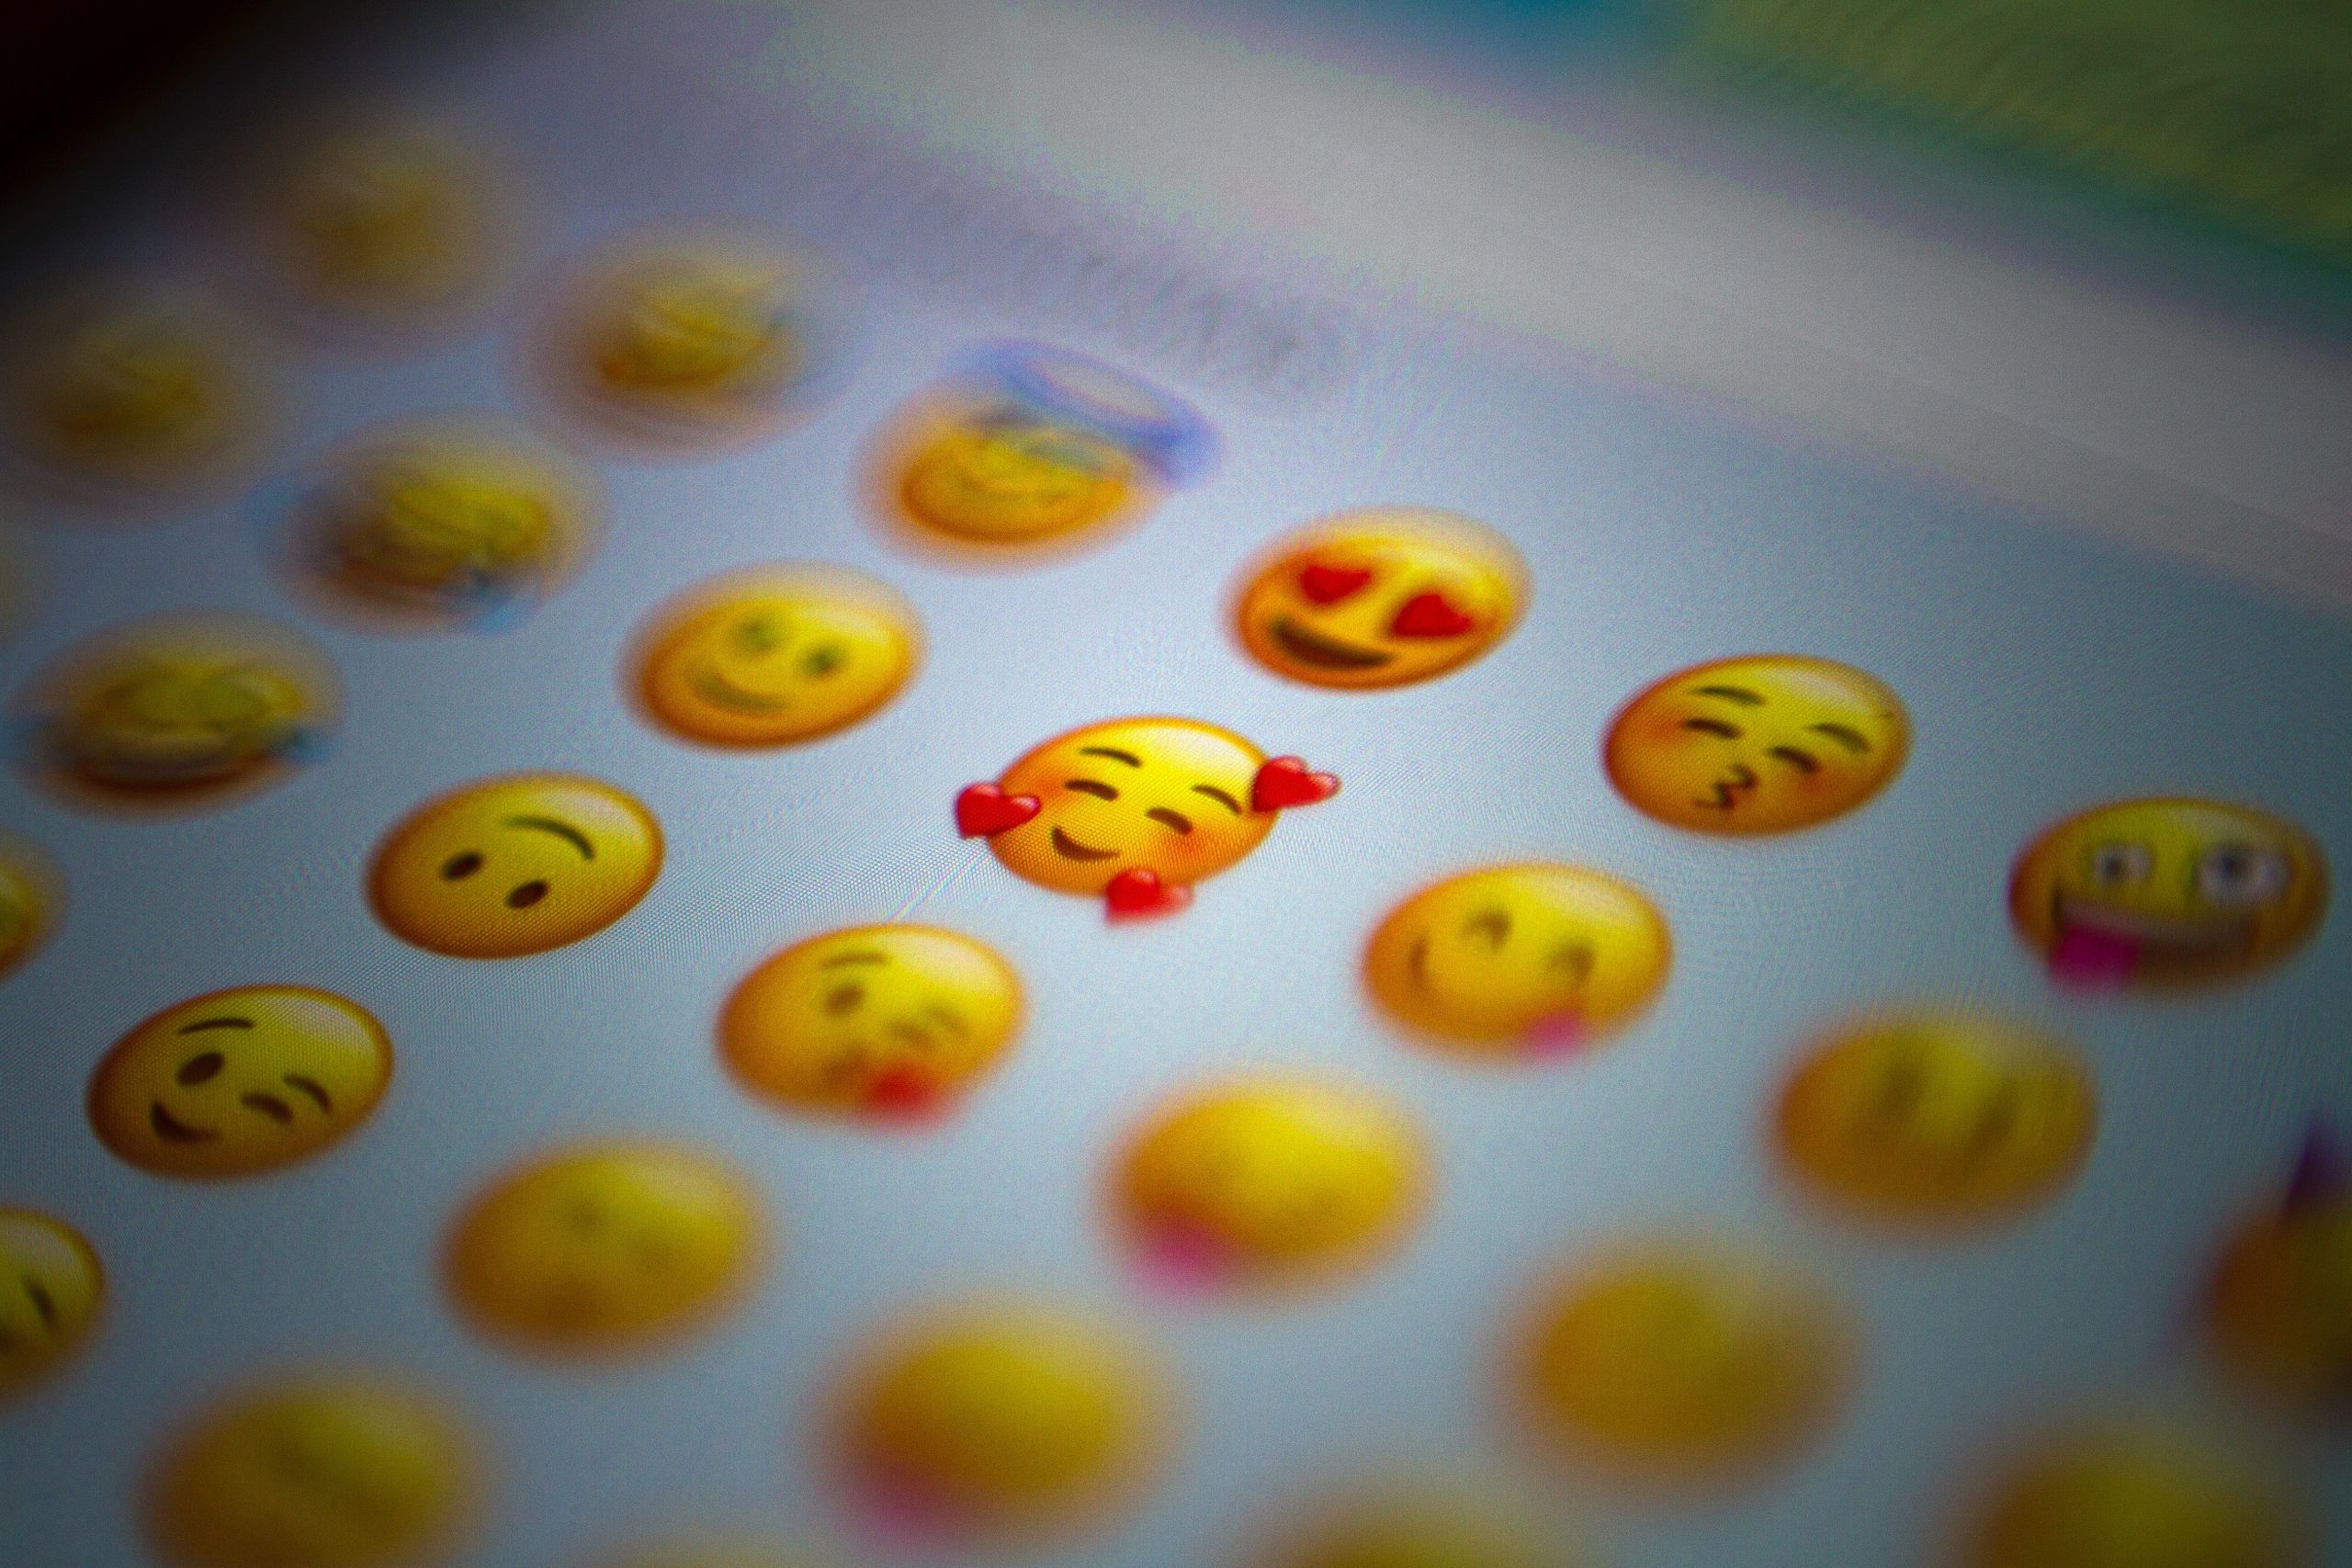 World Emoji Day: History, significance and all details